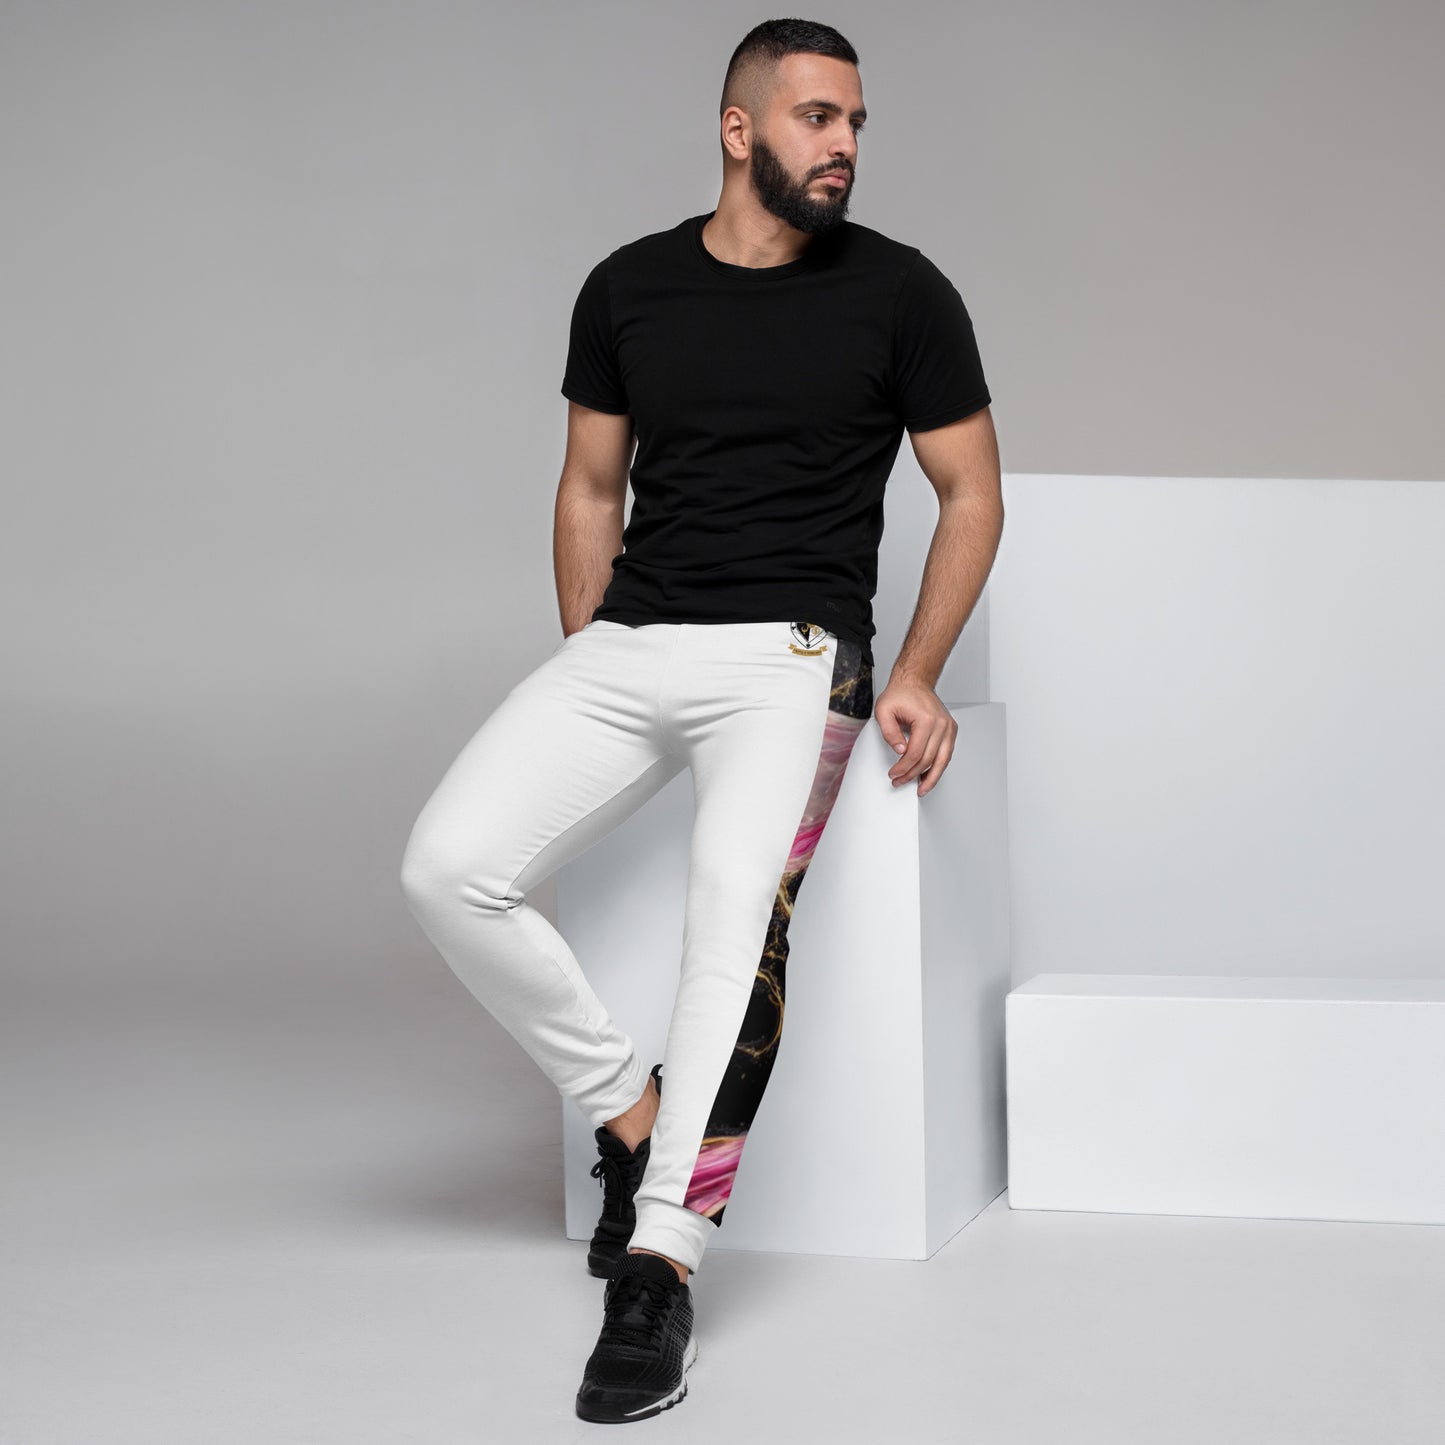 8xquiZit Collection T8T Pynk, Black, N Gold Marble Men's Joggers -White